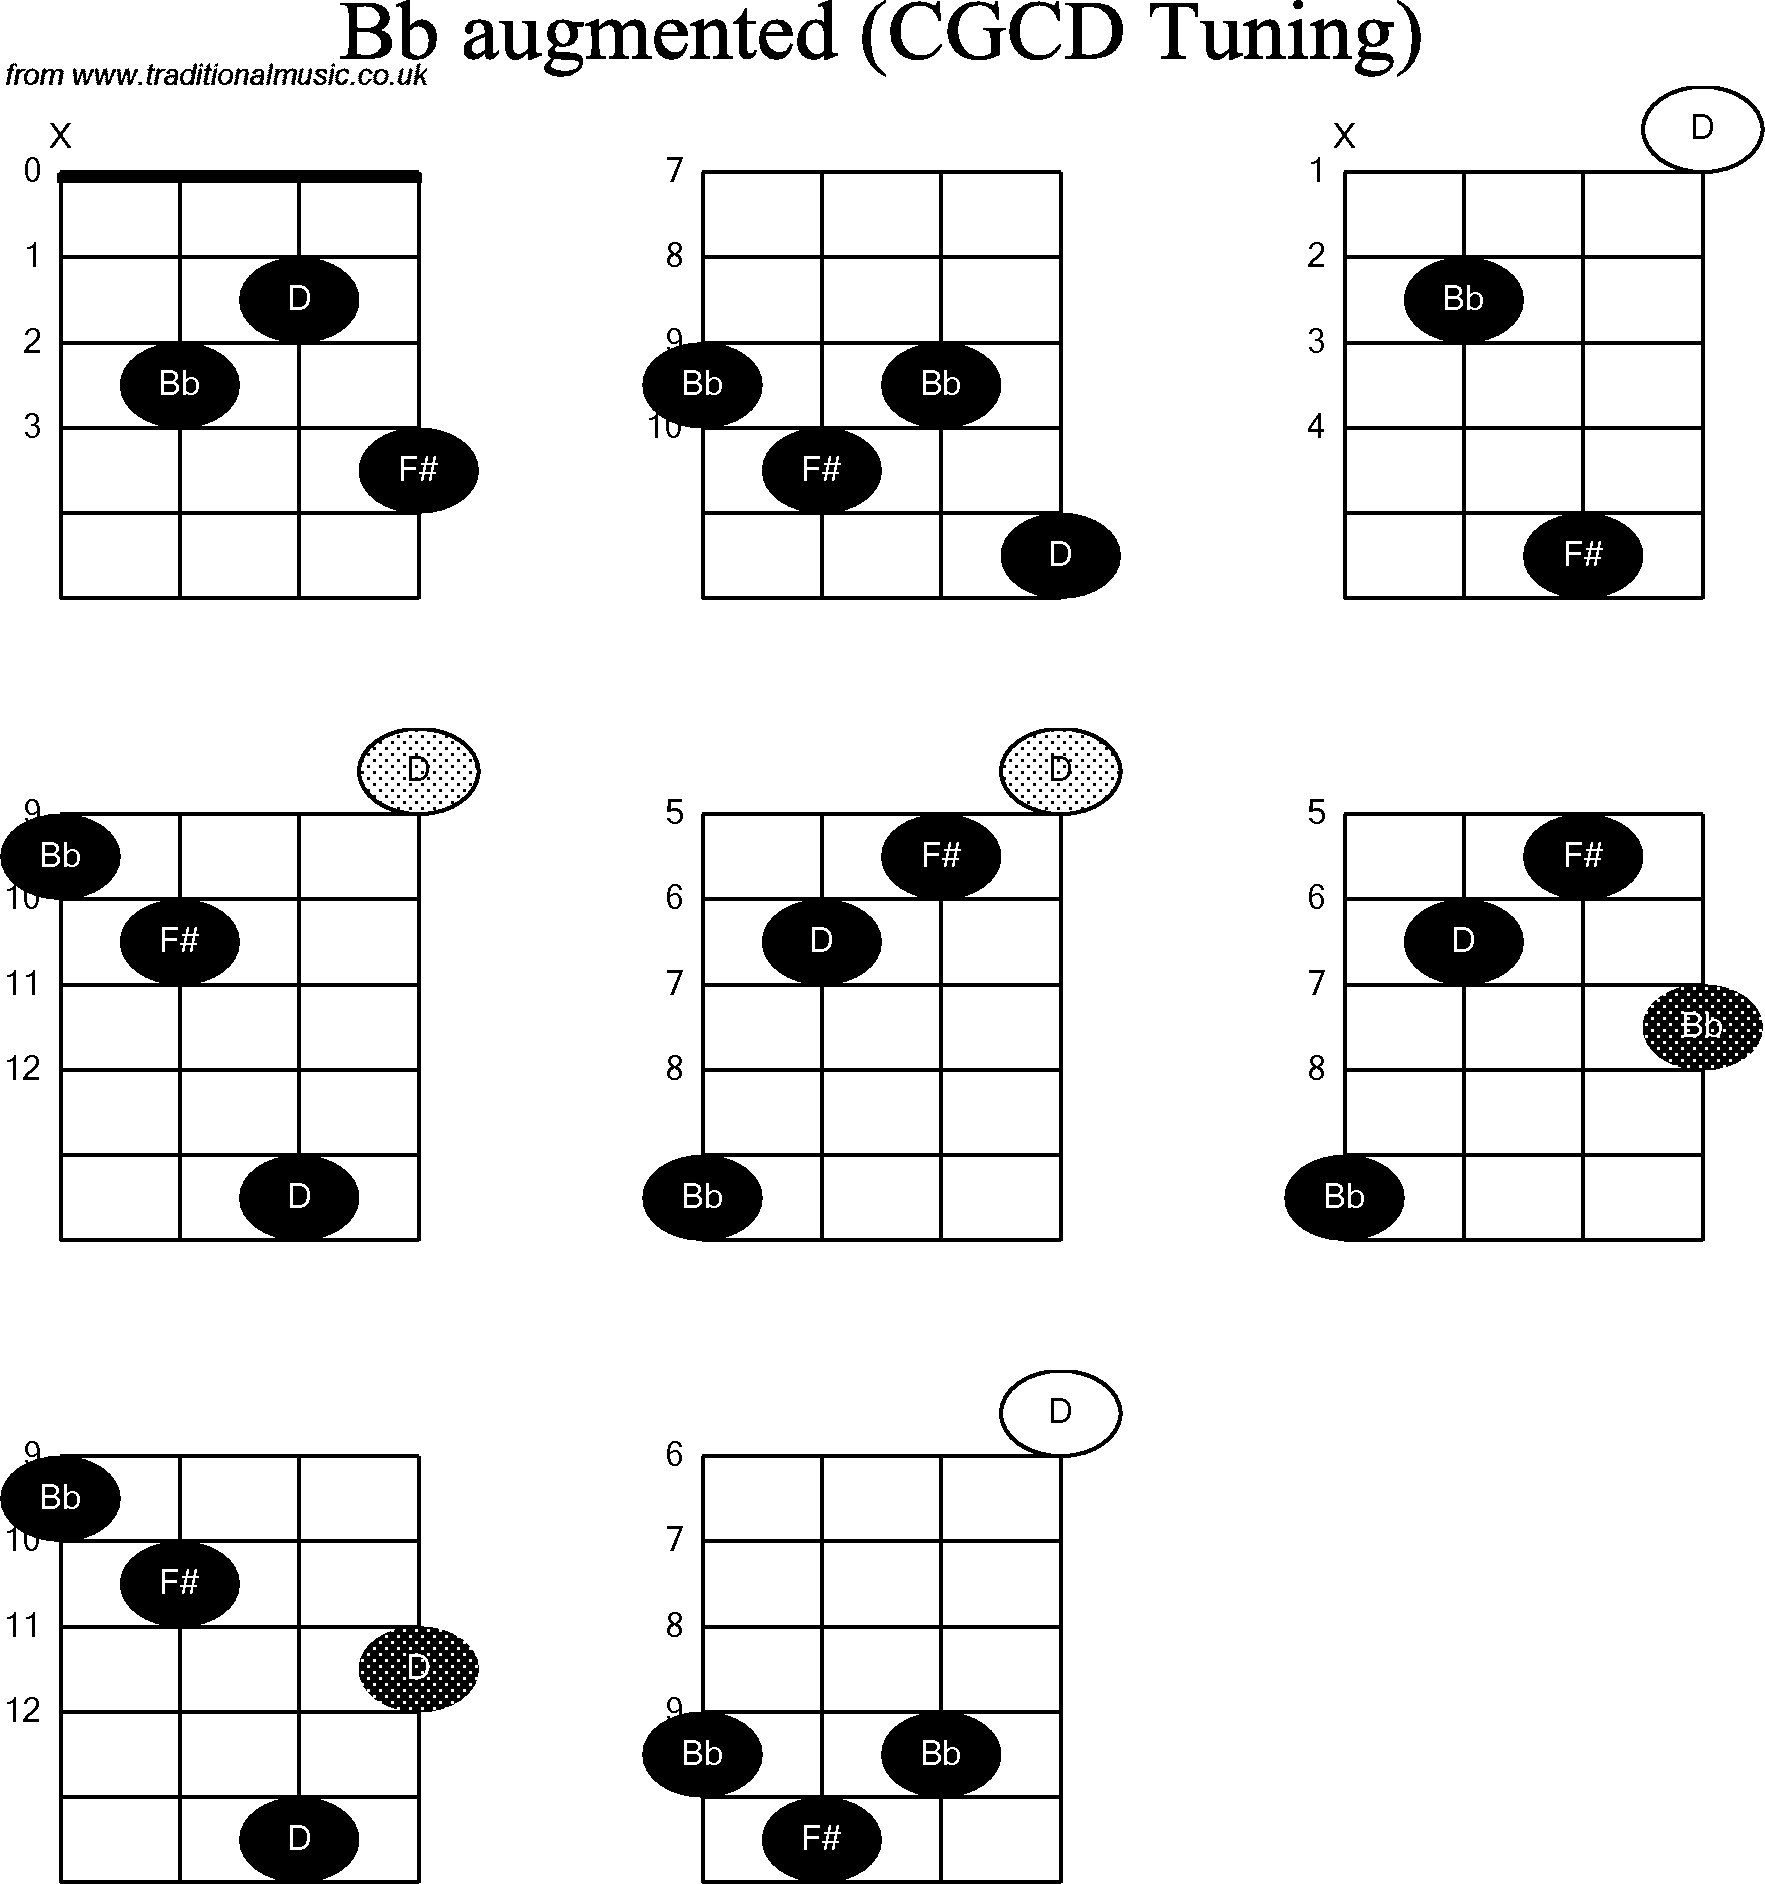 Chord diagrams for Banjo(Double C) Bb Augmented